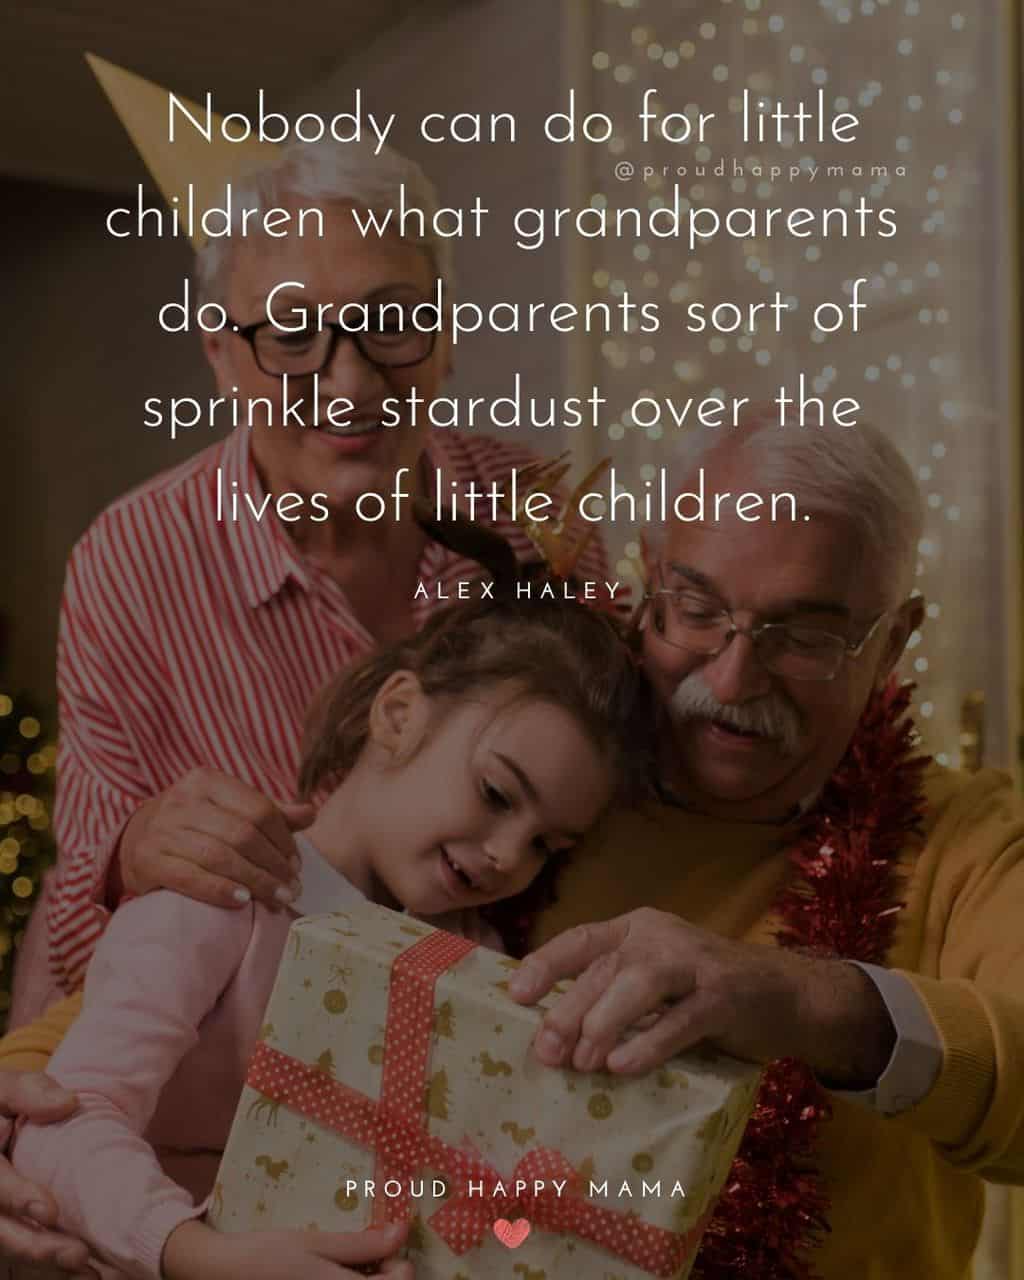 Grandparent Quotes – Nobody can do for little children what grandparents do. Grandparents sort of sprinkle stardust over the